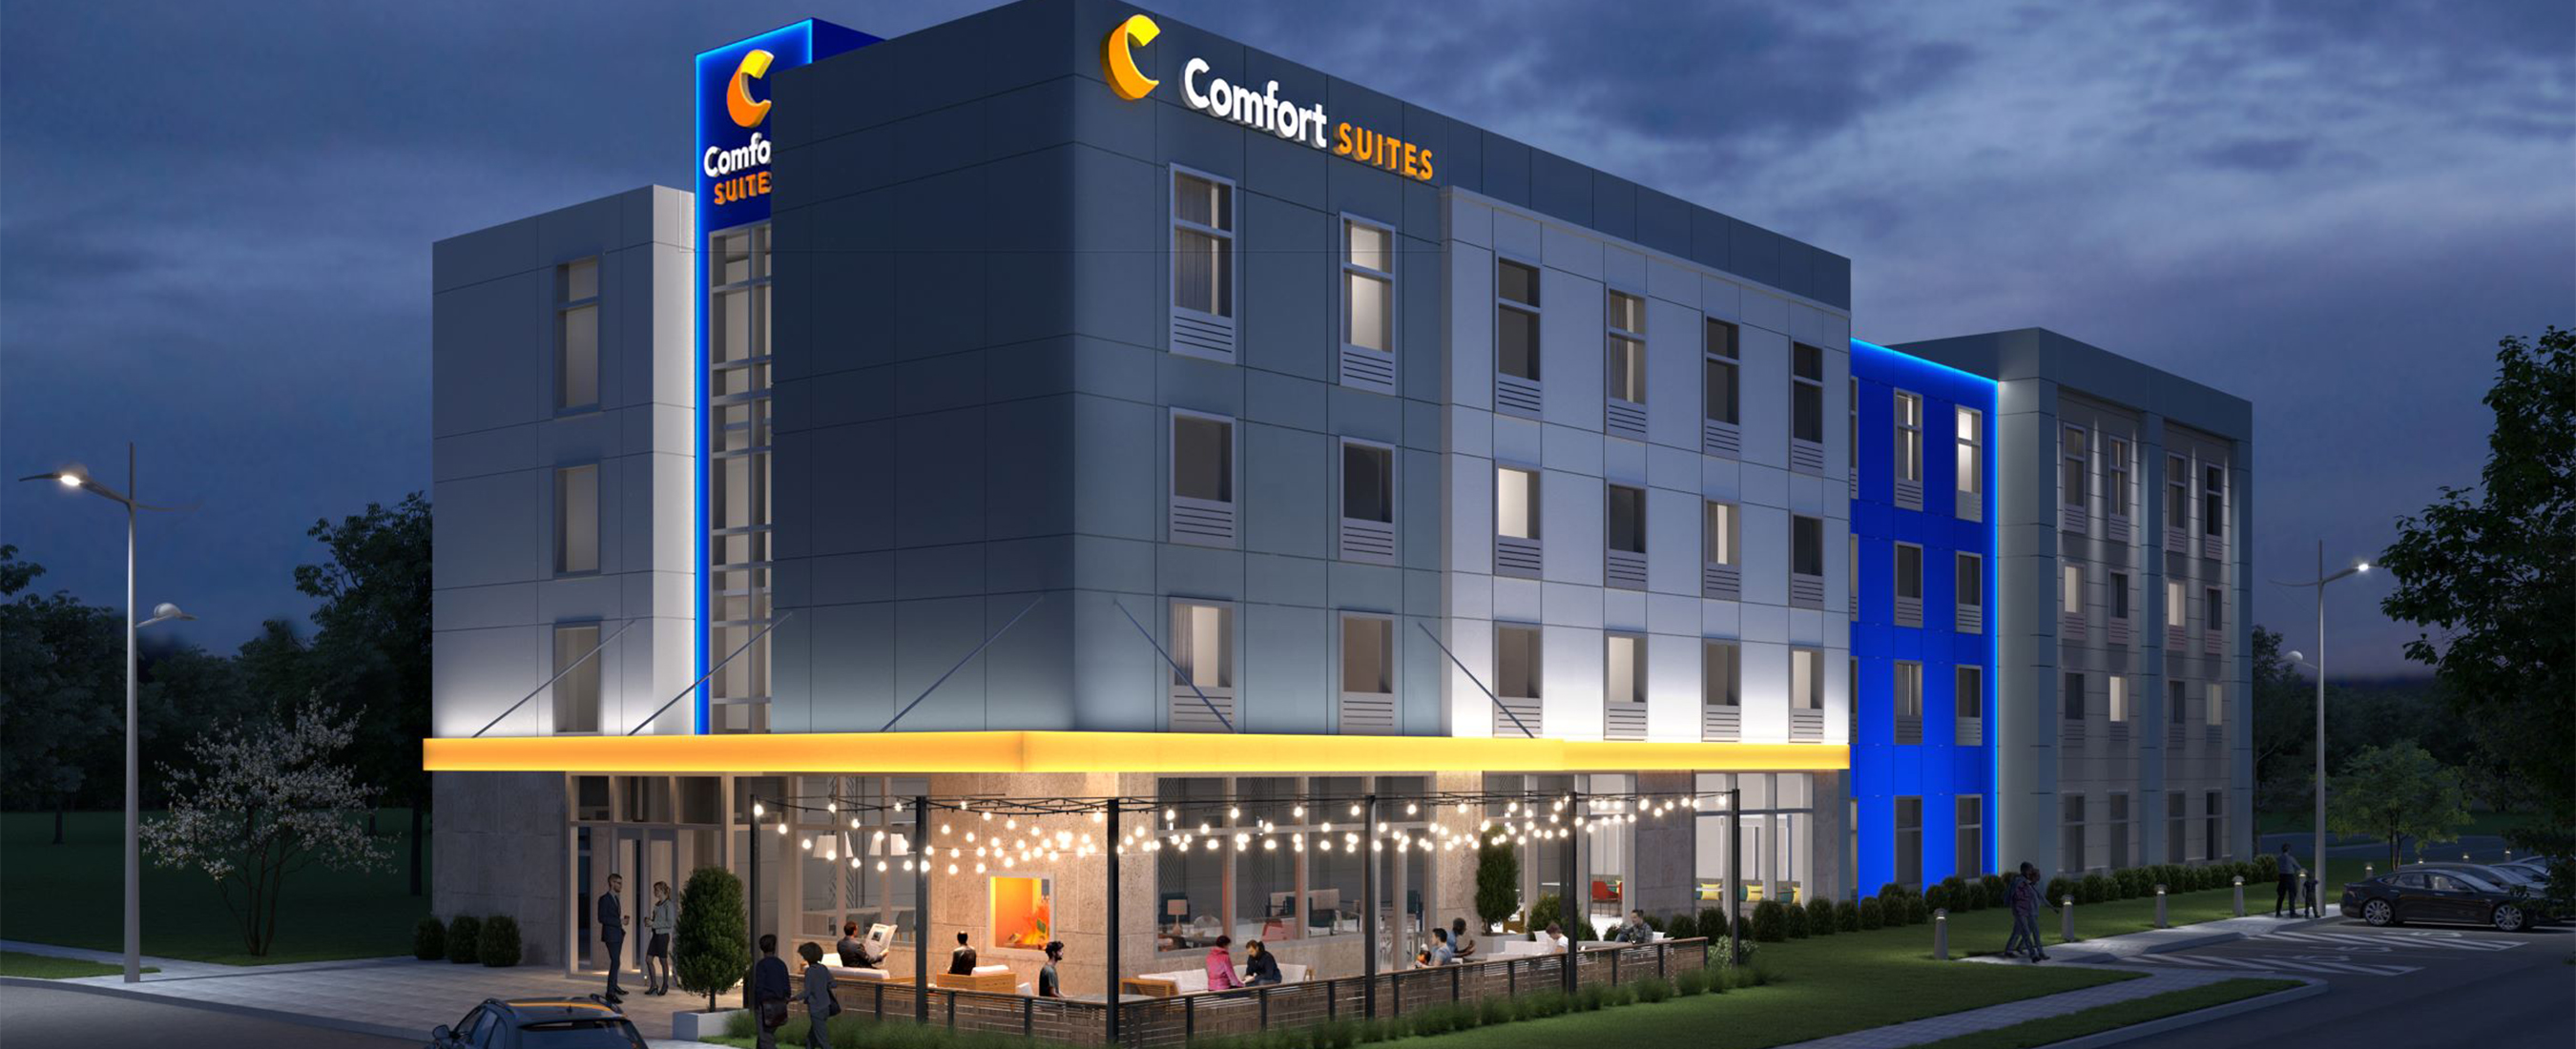 Exterior view of Comfort hotel at night